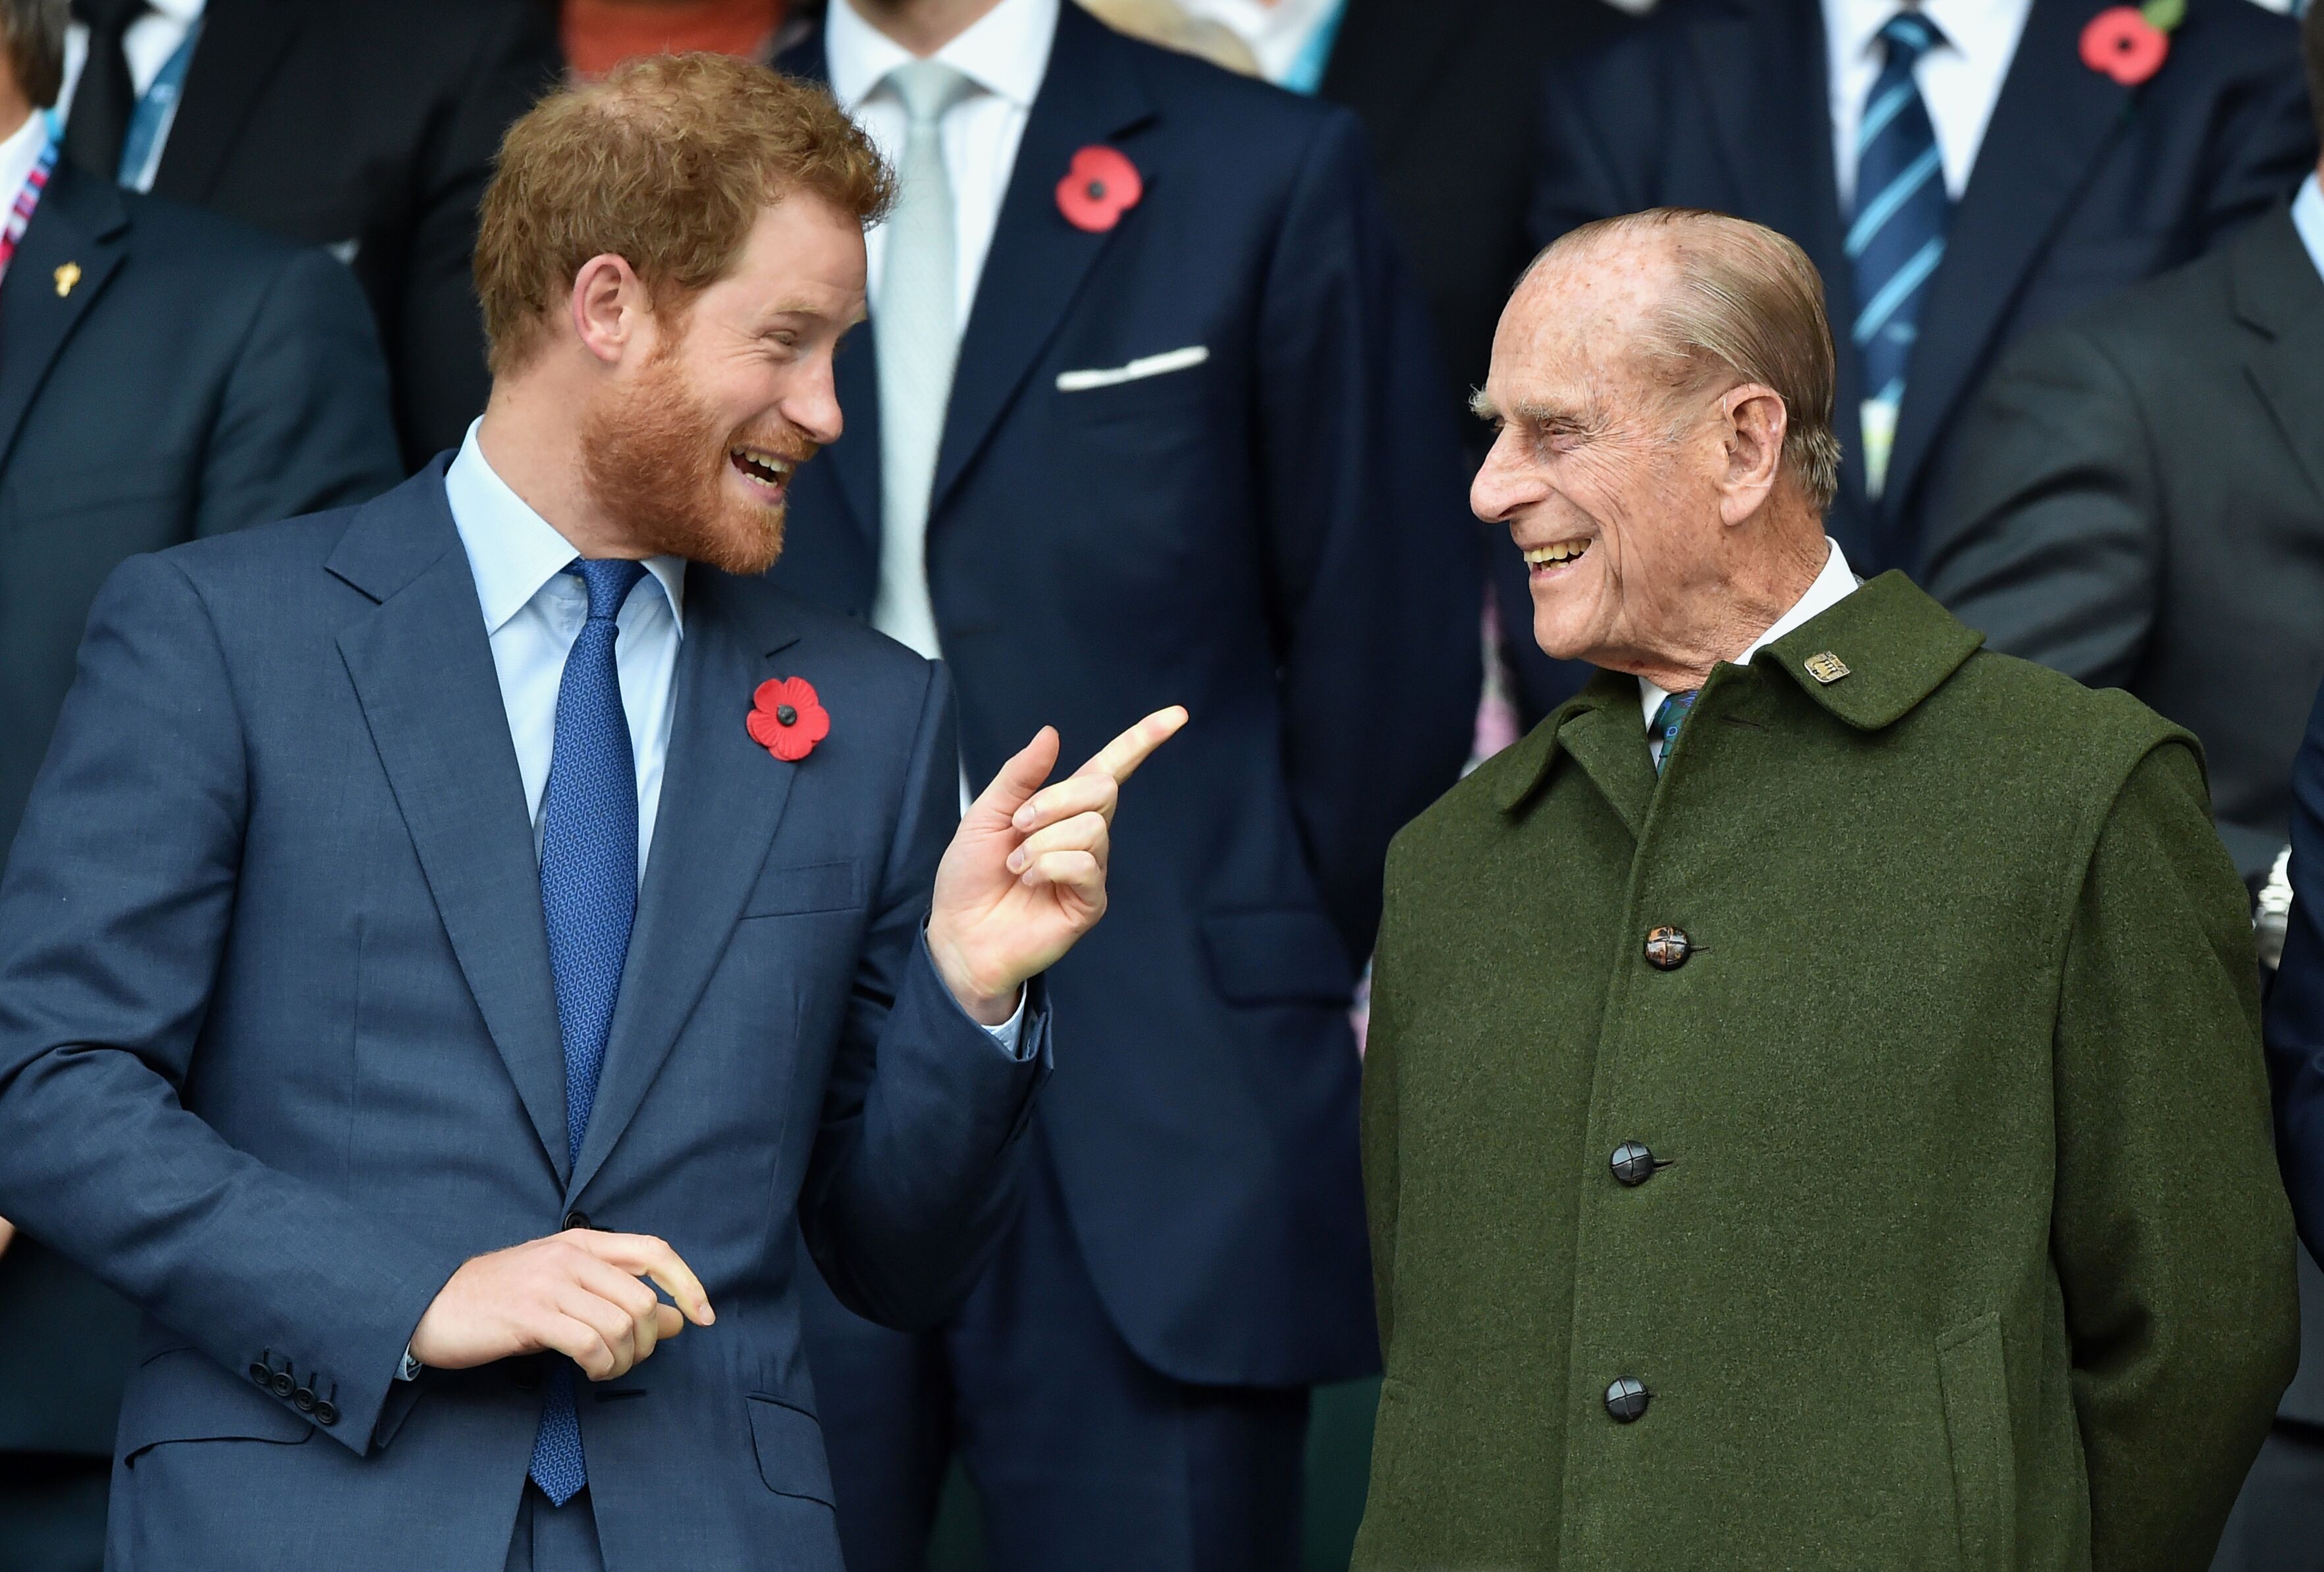 Prince Harry and Prince Philip, Duke of Edinburgh attend the 2015 Rugby World Cup Final match  | Getty Images